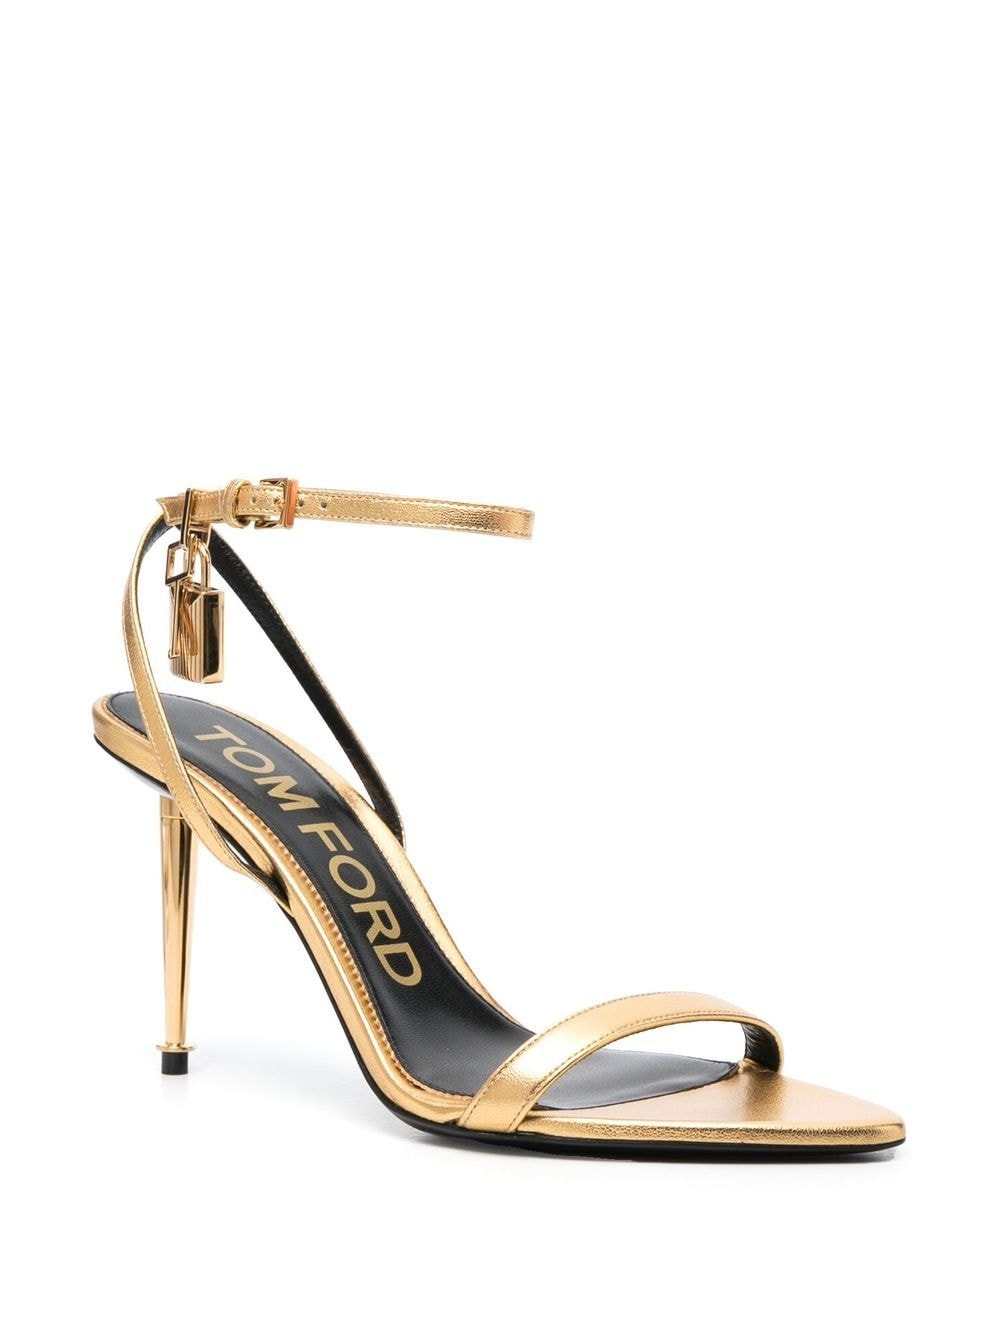 TOM FORD Glamorous Metallic Leather Sandals with Padlock Detail